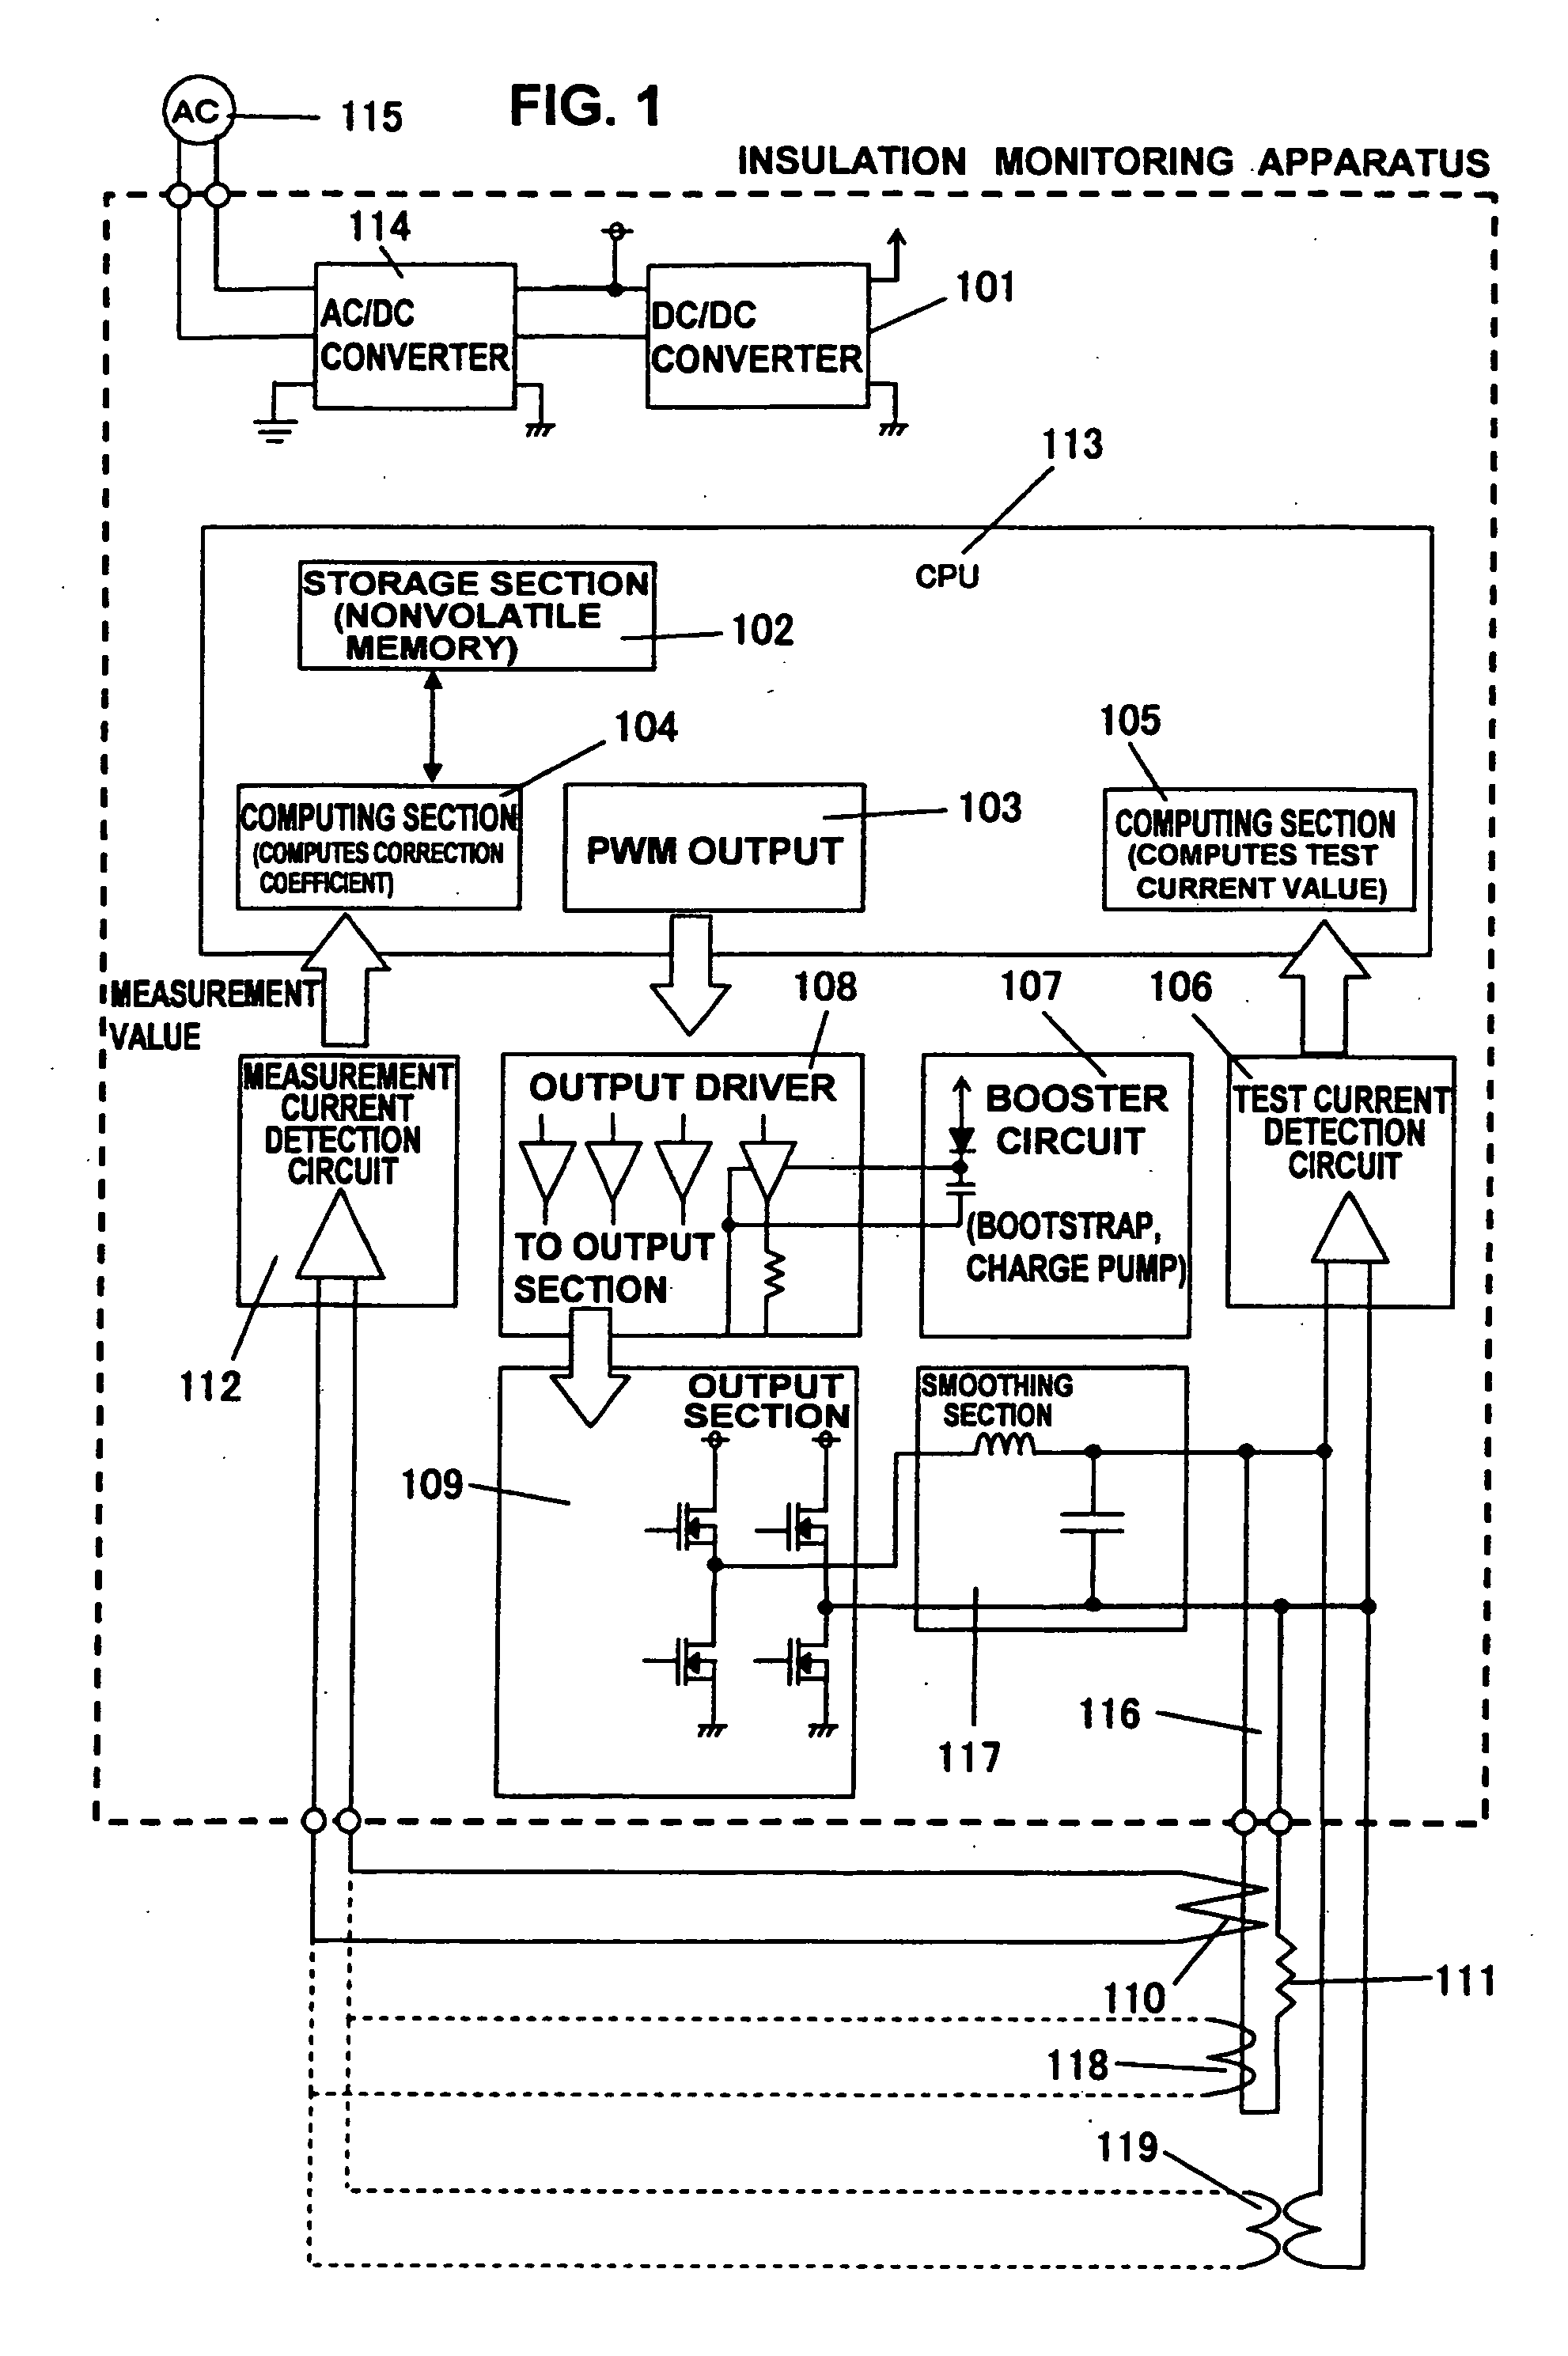 Property monitoring apparatus for current transformer or electric transformer